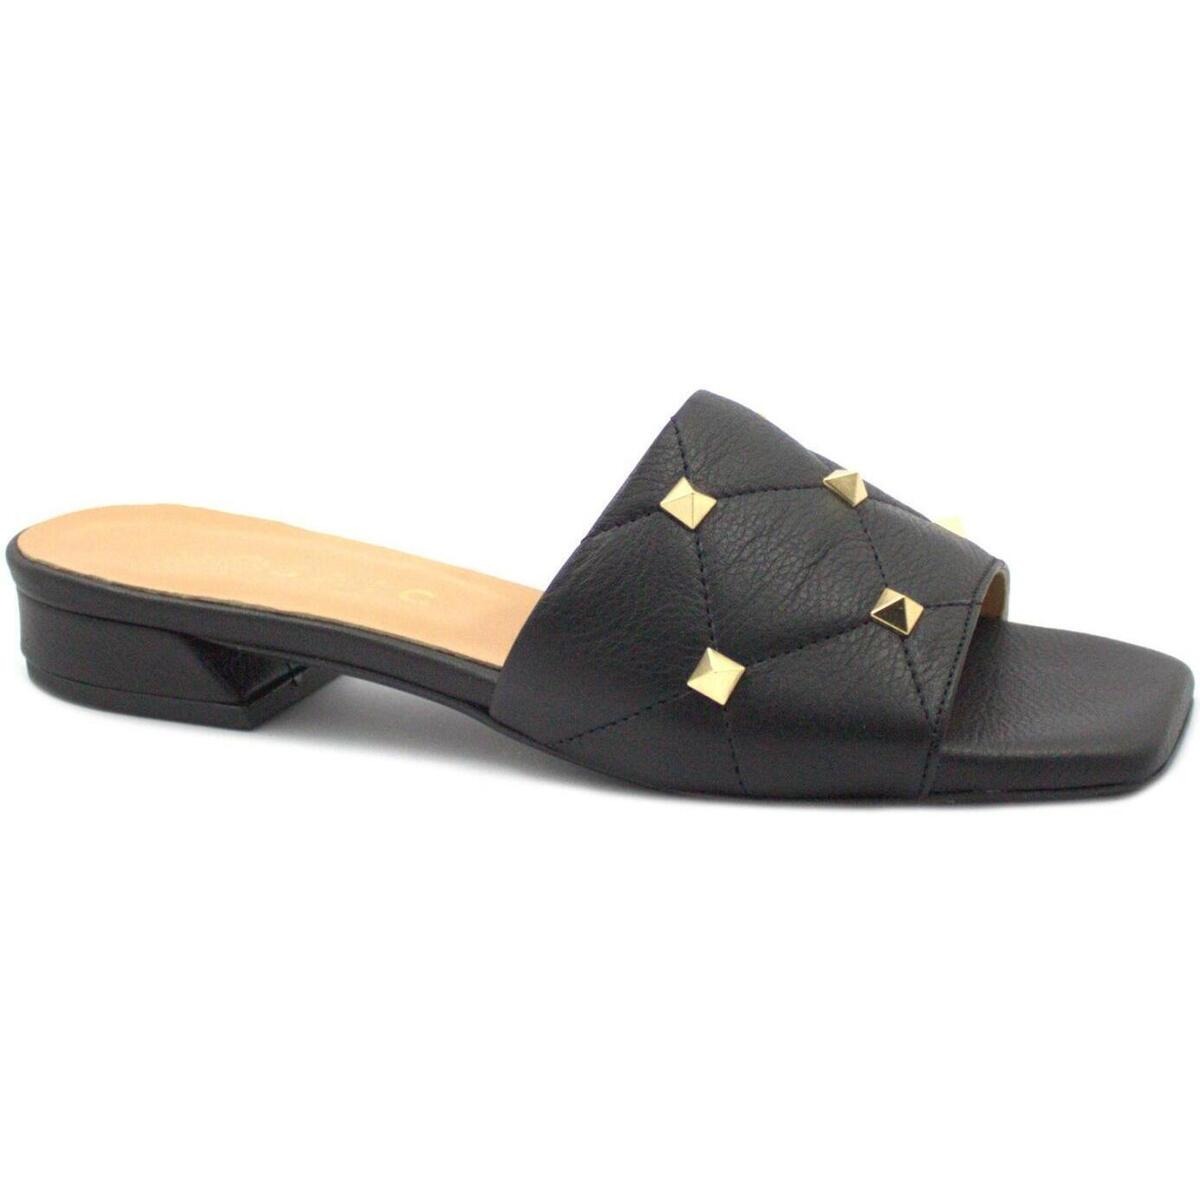 Spartoo - Womens Slippers Black from Mosaic GOOFASH